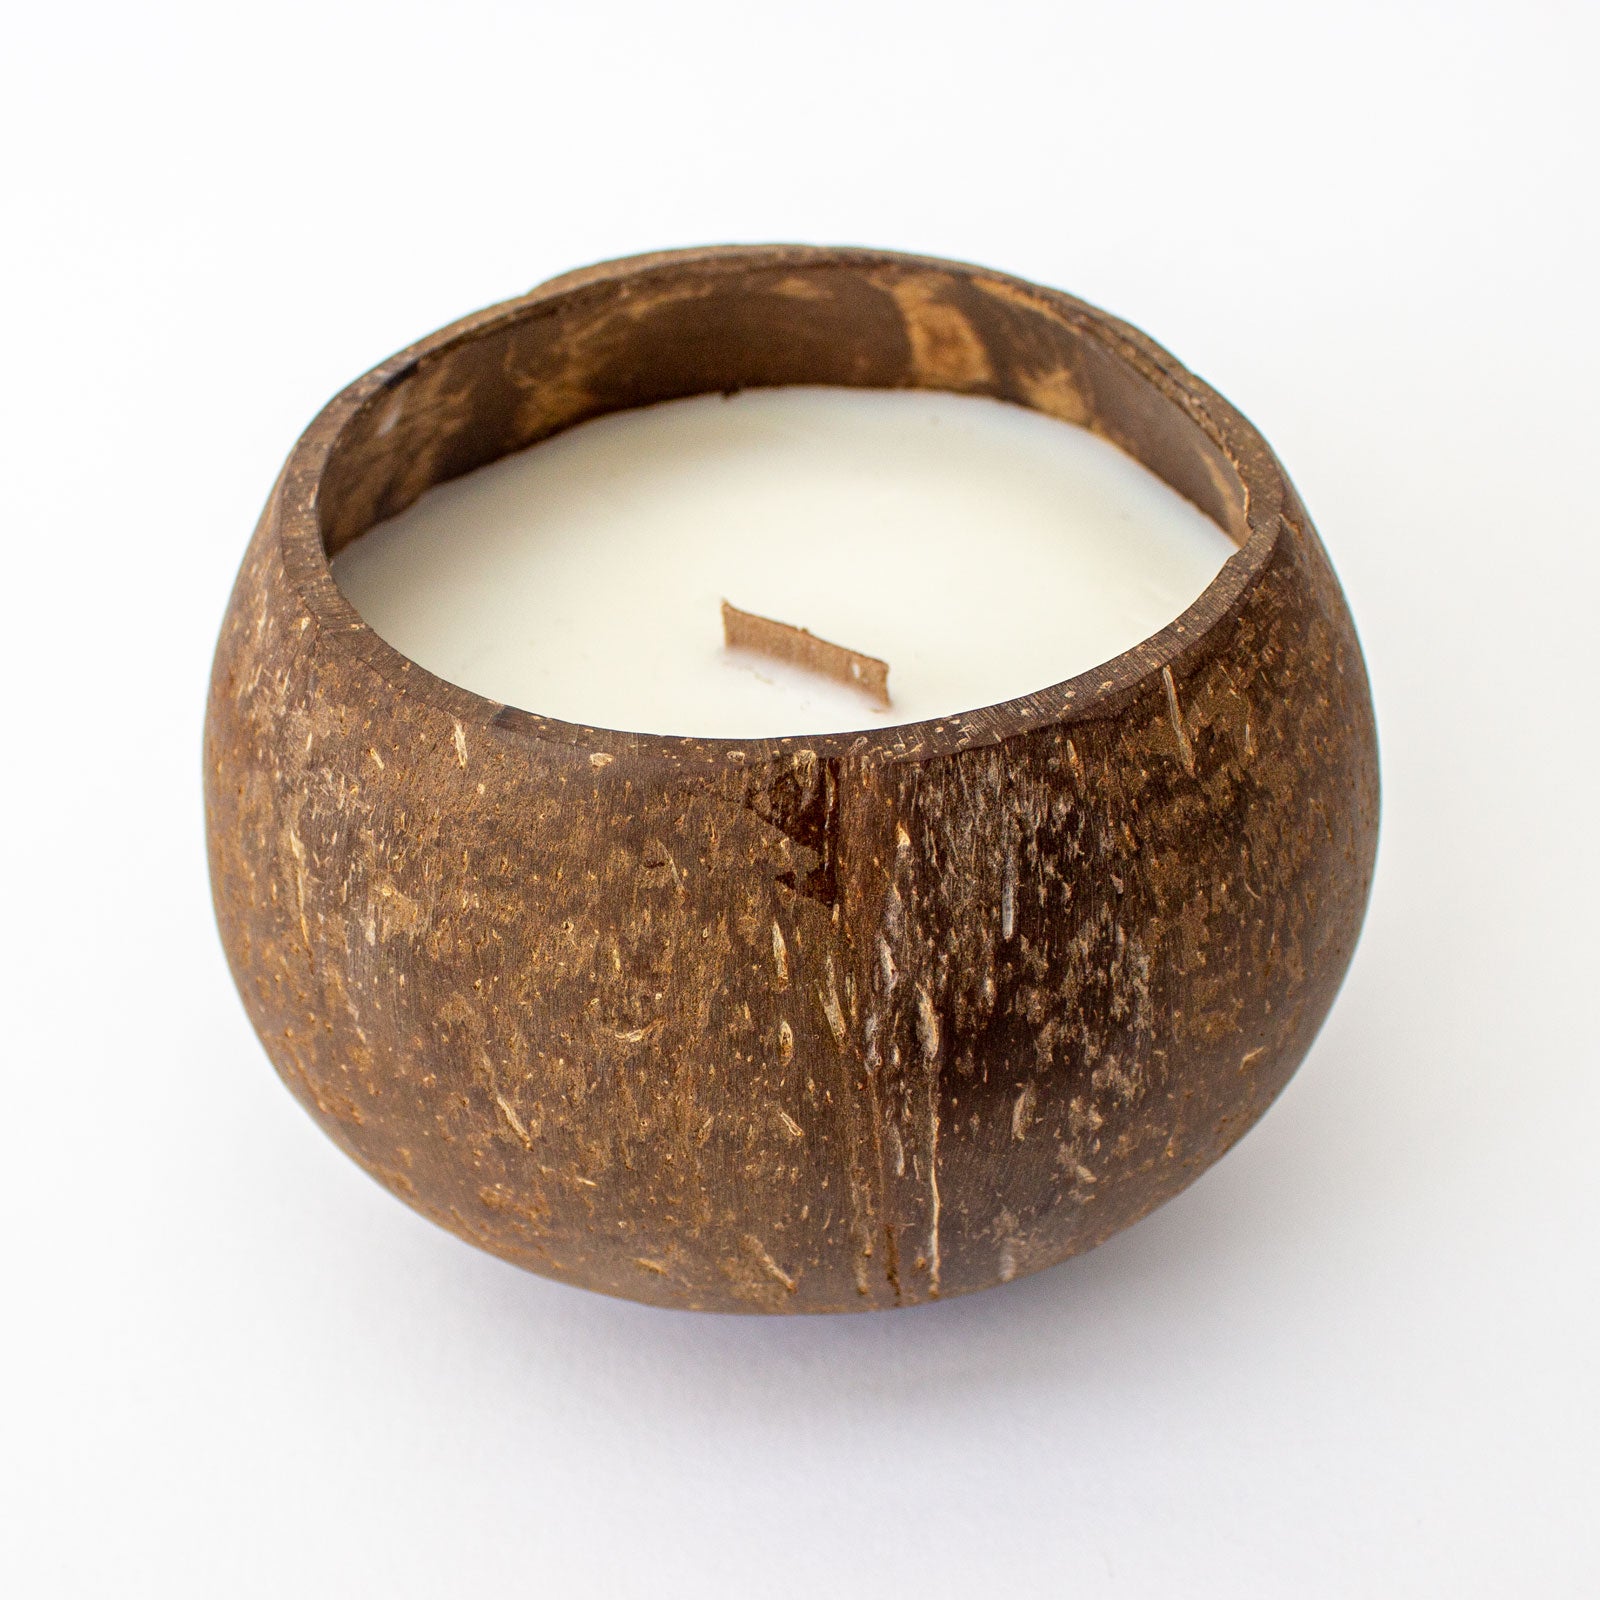 HAPPY BIRTHDAY GRANNY - Toasted Coconut Bowl Candle – Soy Wax - Gift Present